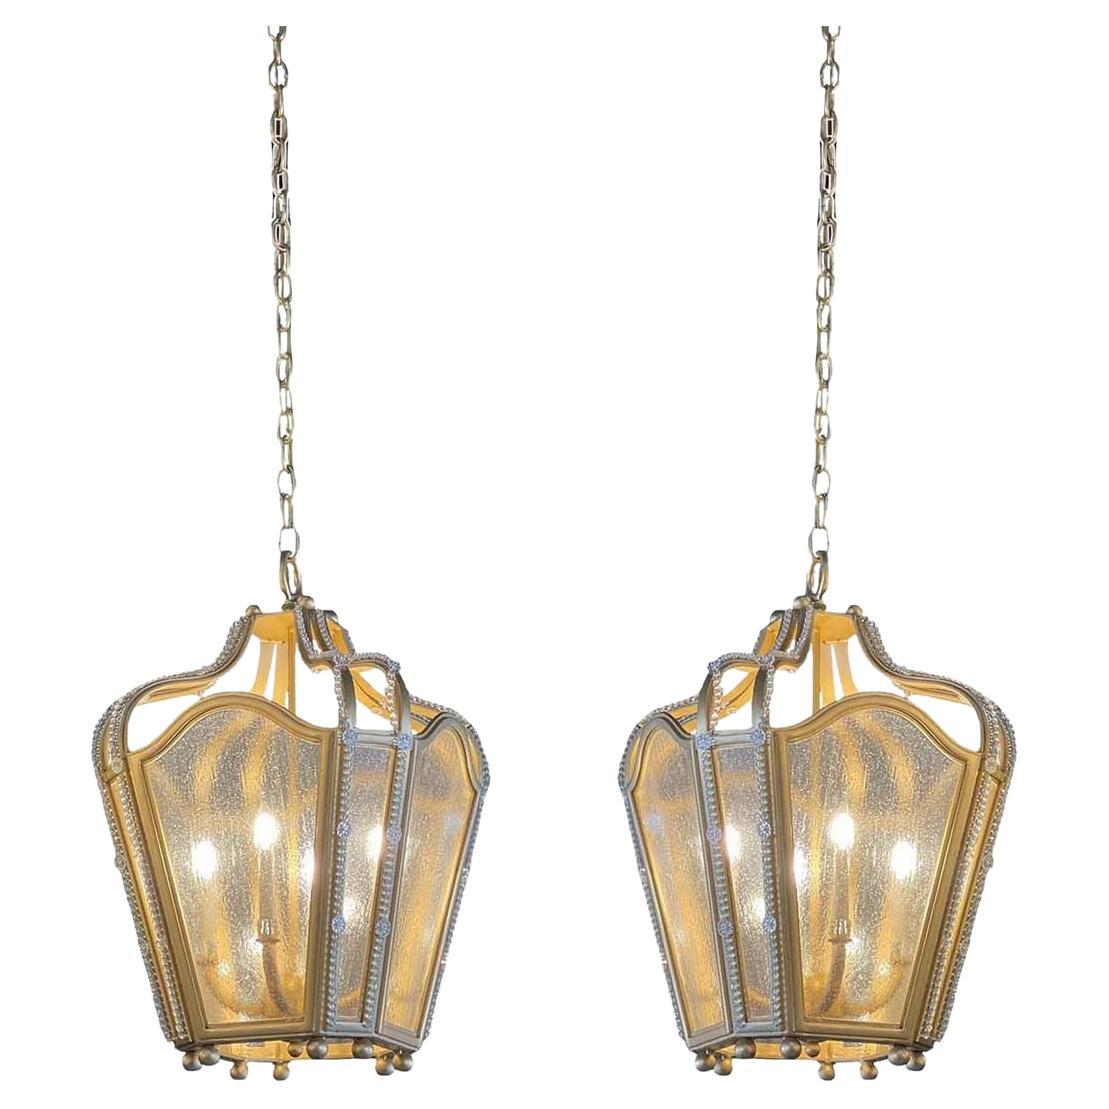 Pair of Gold Finished Wrought Iron Lanterns with Textured Glass and Glass Beads